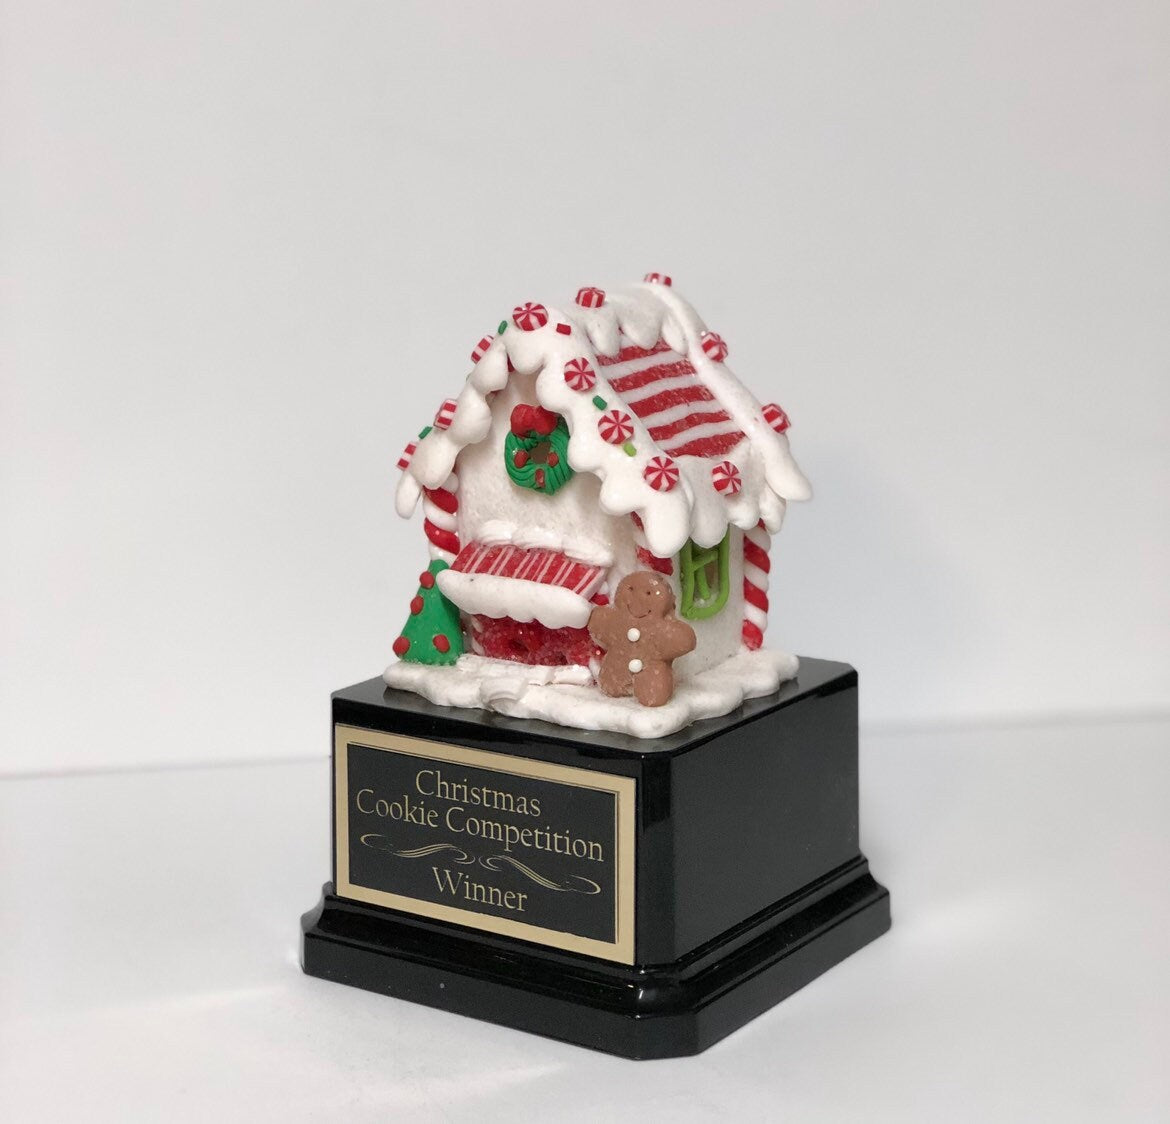 Gingerbread House Cookie Decorating Bake Off Trophy Ugly Sweater Trophy Gingerbread Man Christmas Cookie Gingerbread Man Christmas Decor